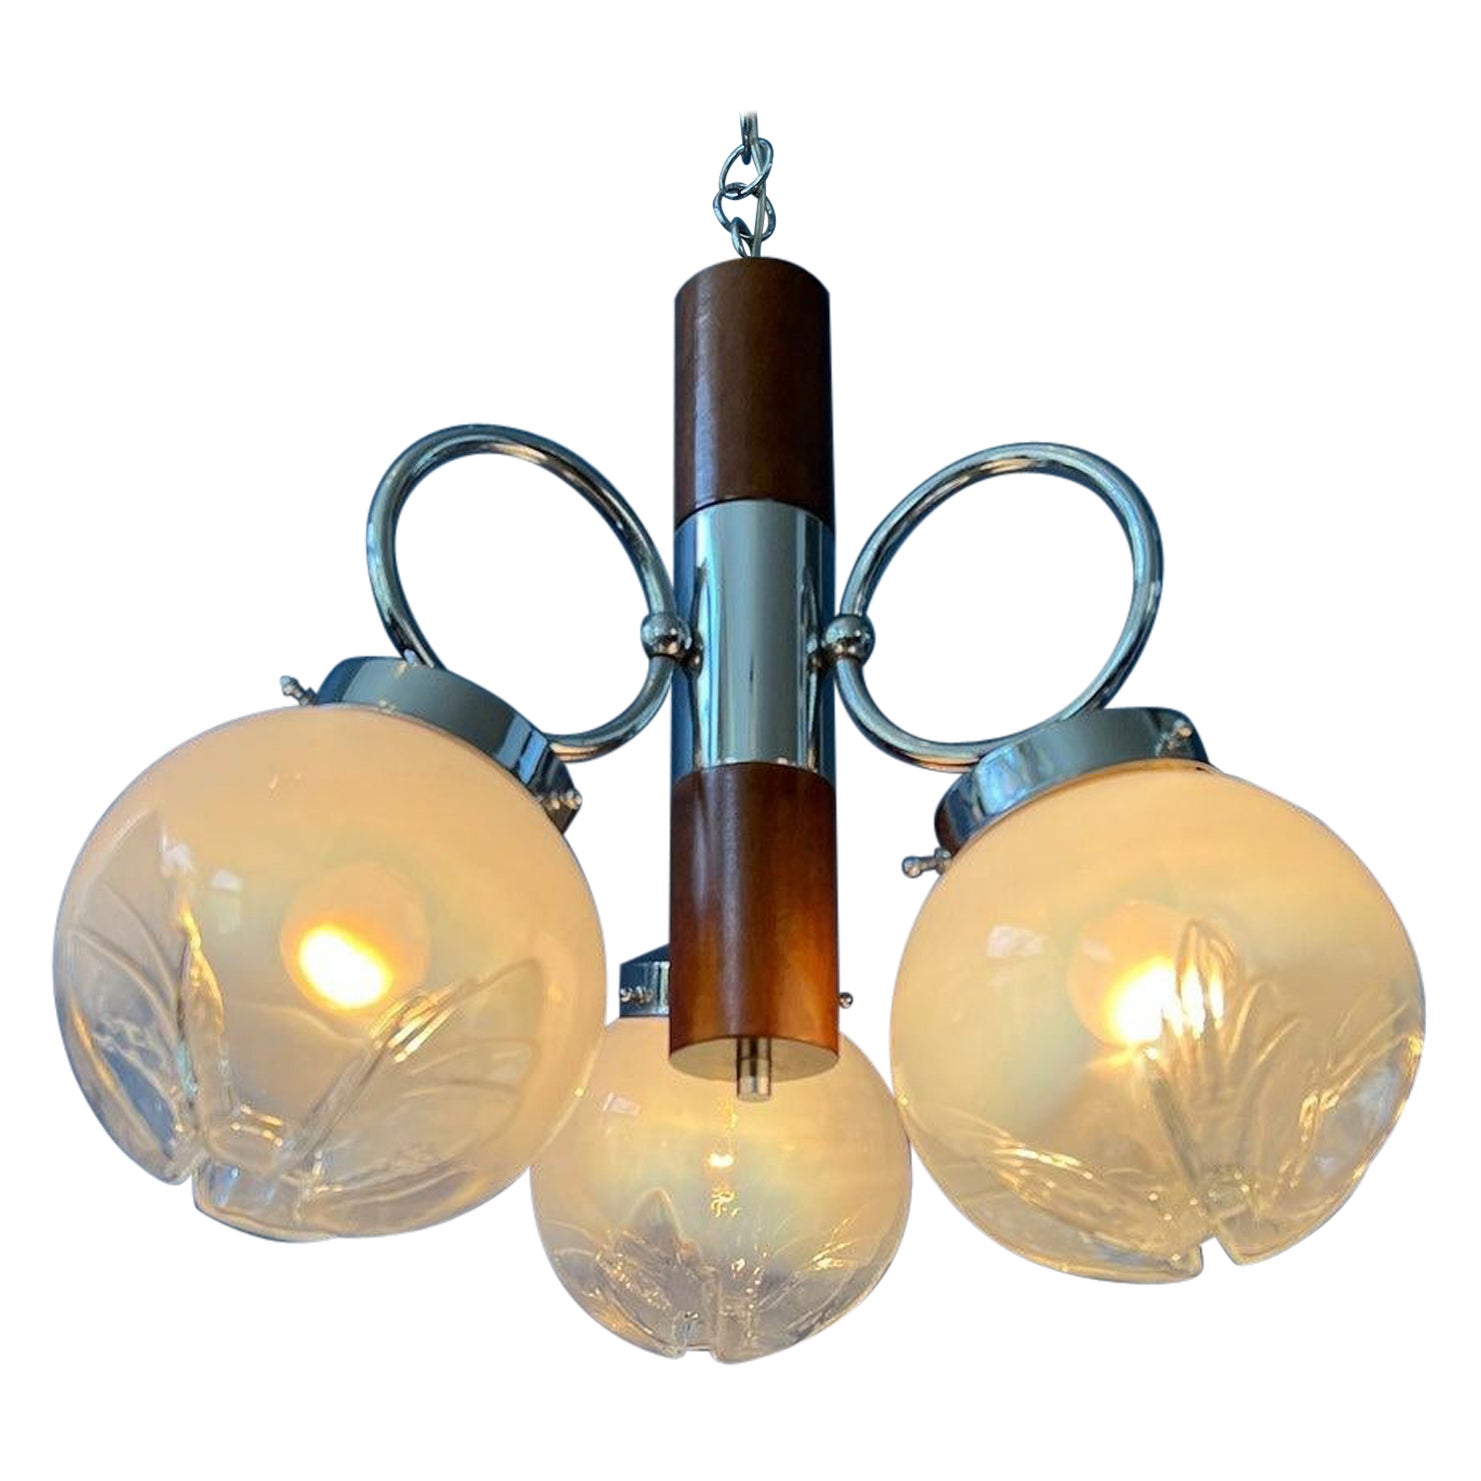 Mid Century Vintage Ceiling Lamp by Mazzega Murano, 1970s